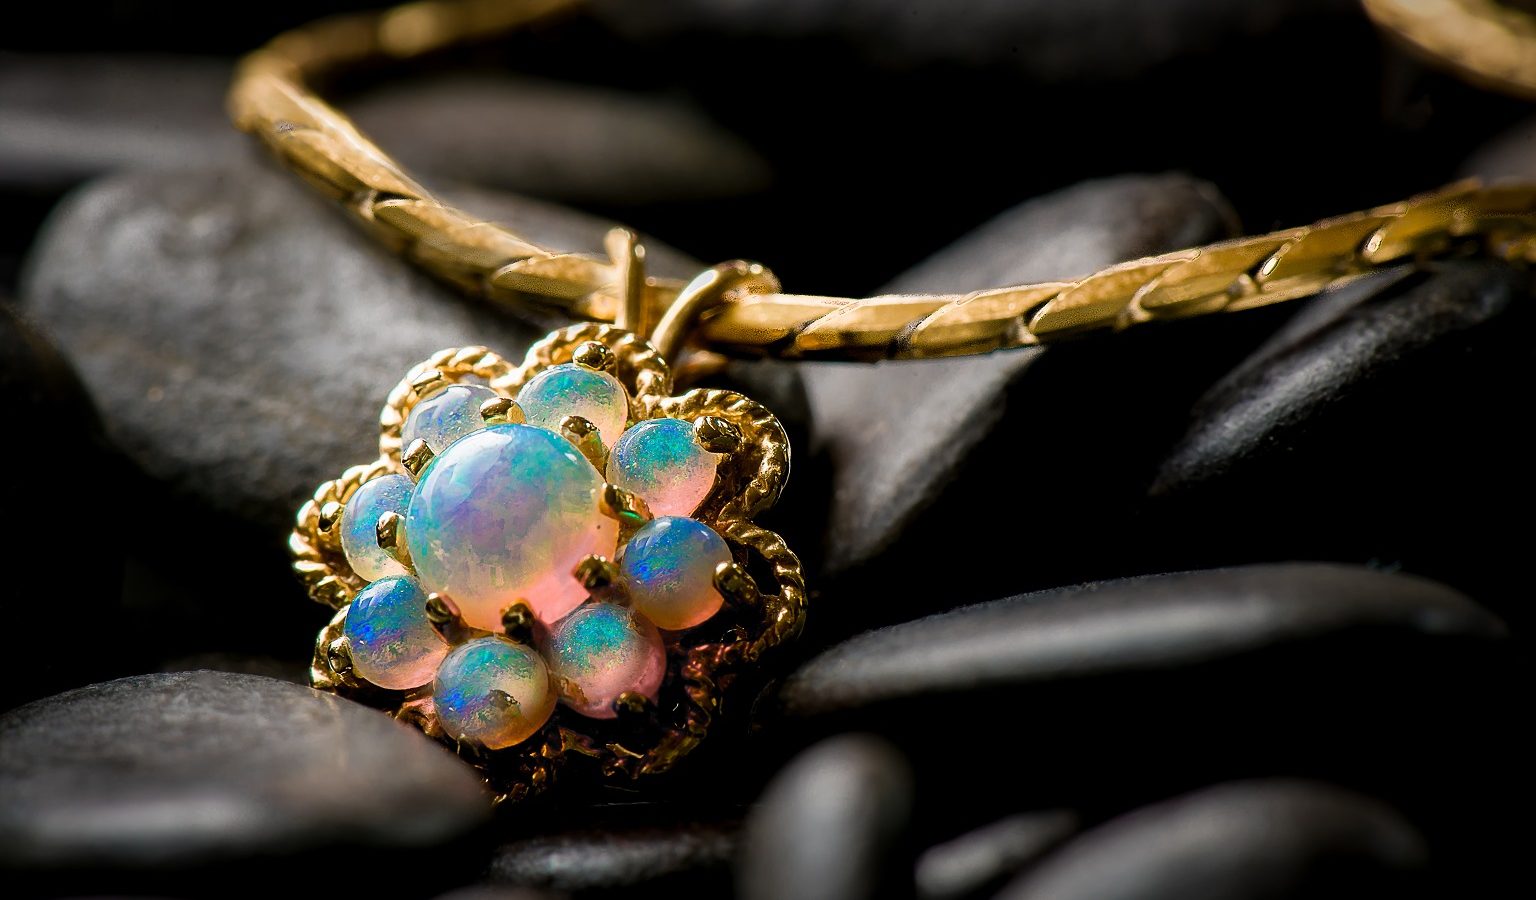 opal meaning